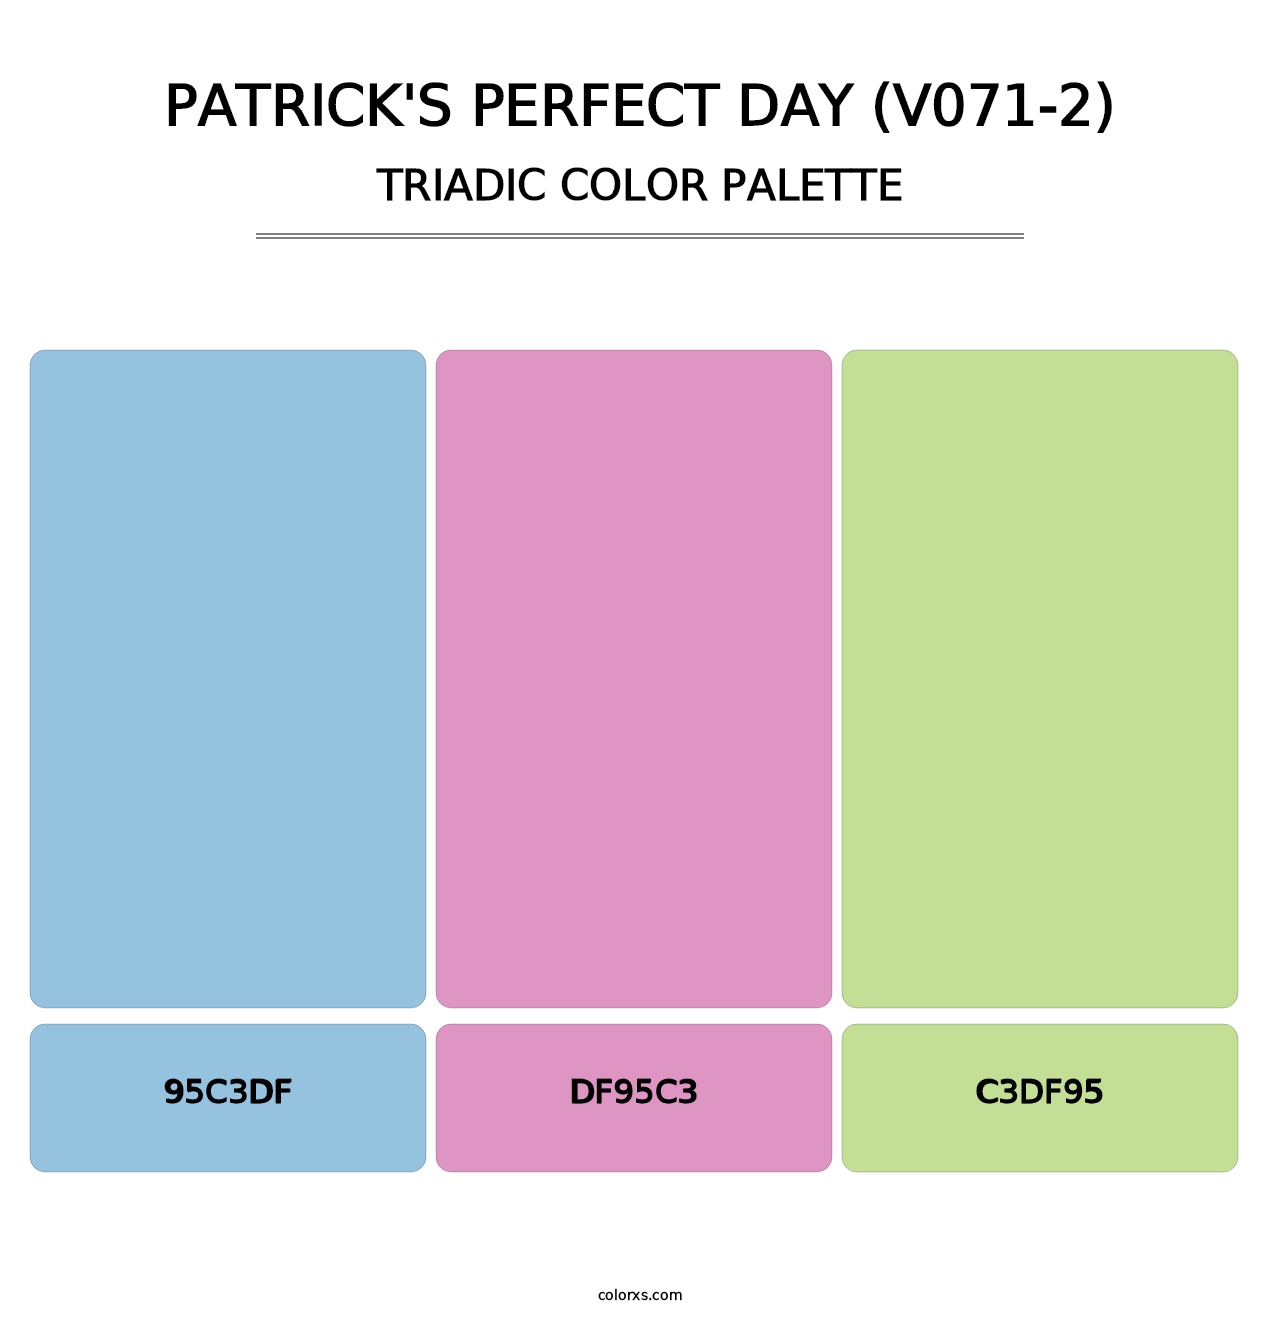 Patrick's Perfect Day (V071-2) - Triadic Color Palette